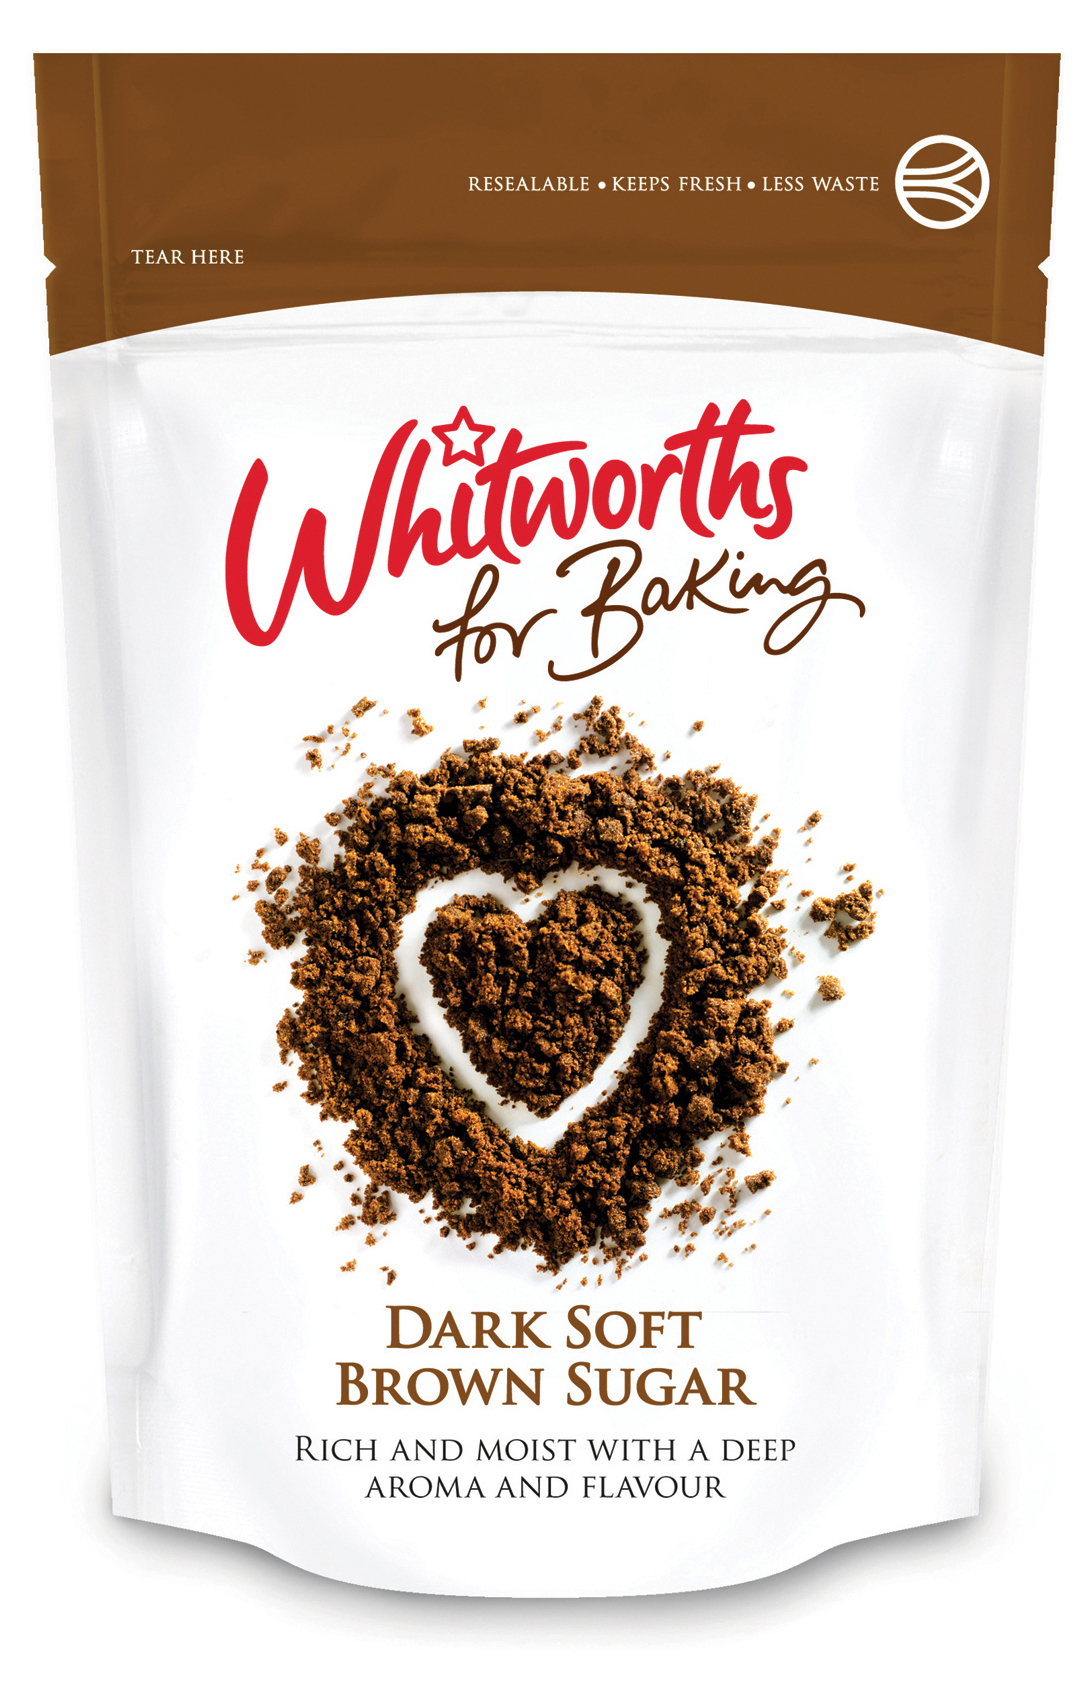 Packaging created by Leahy Brand Design for baking sugar brand Whitworths for Baking